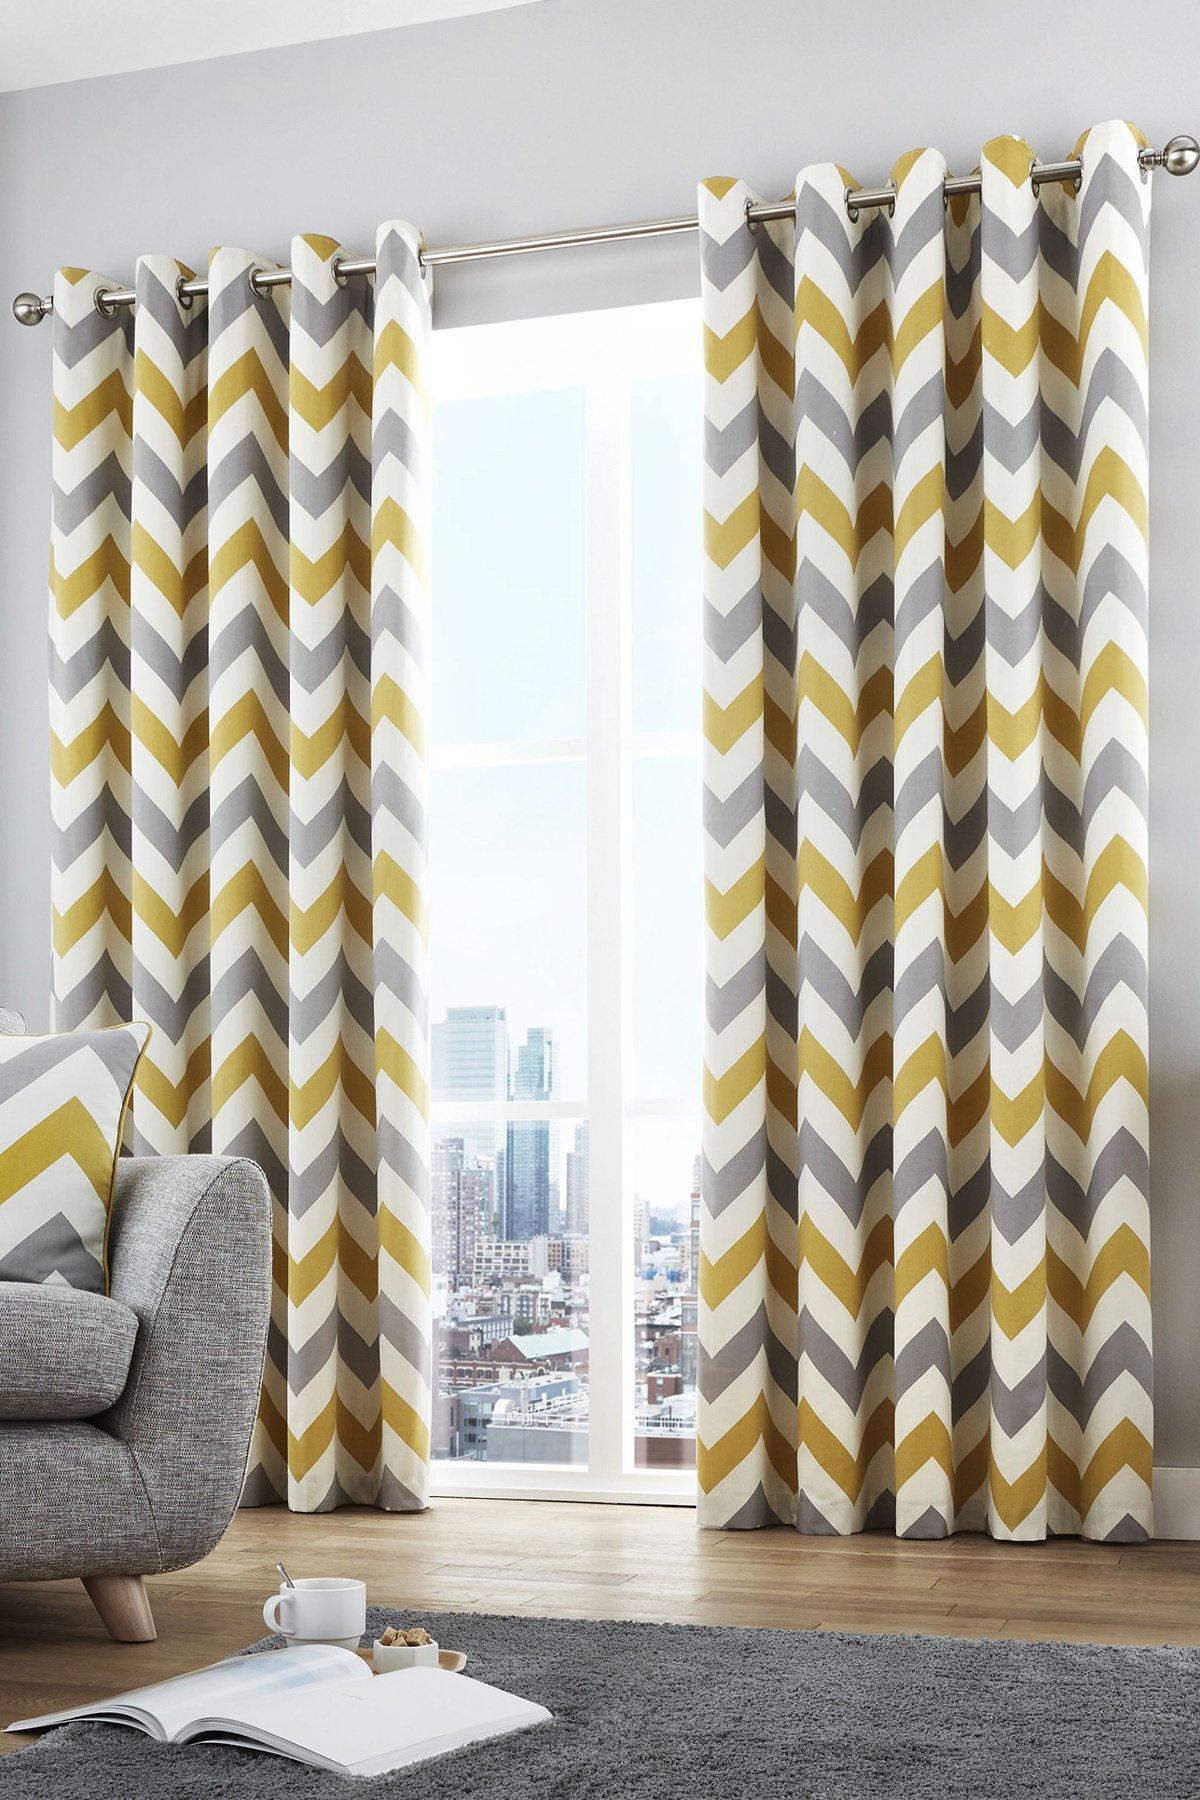 'Chevron' Lined 100% Cotton Pair of Eyelet Curtains